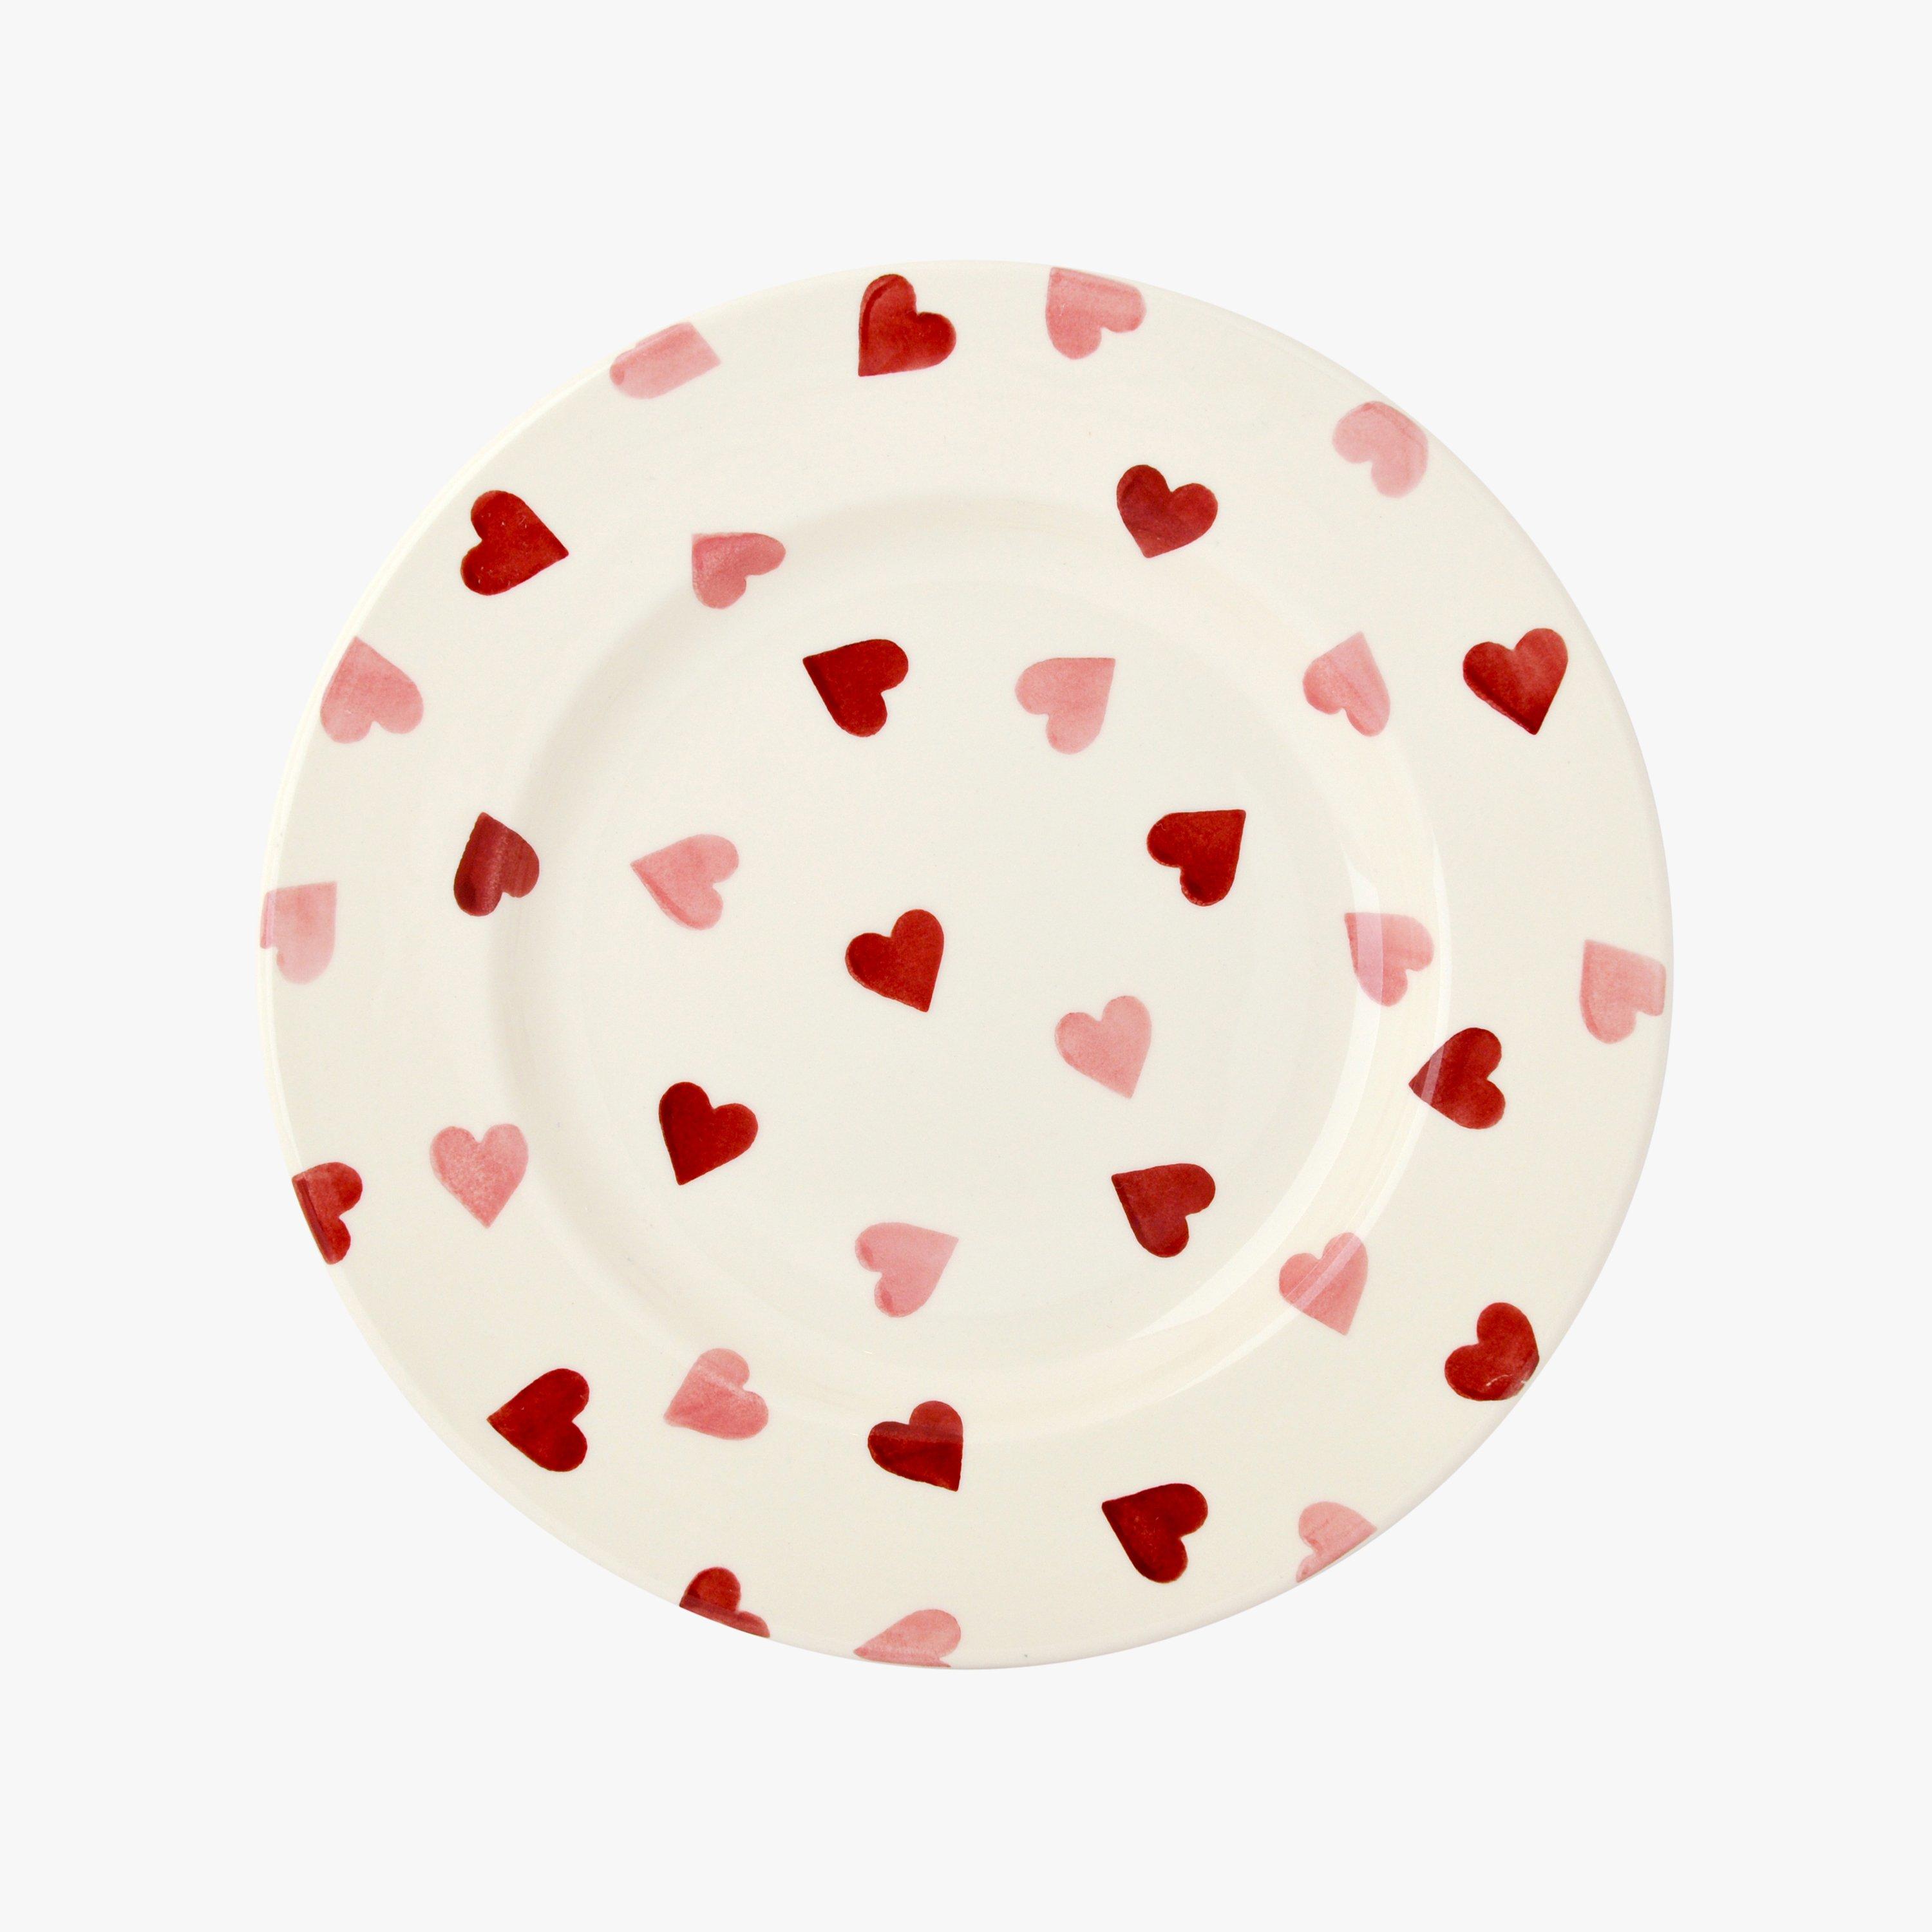 Emma Bridgewater  Seconds Pink Hearts 8 1/2" Plate - Unique Handmade & Handpainted English Earthenware British-Made Pottery Plates